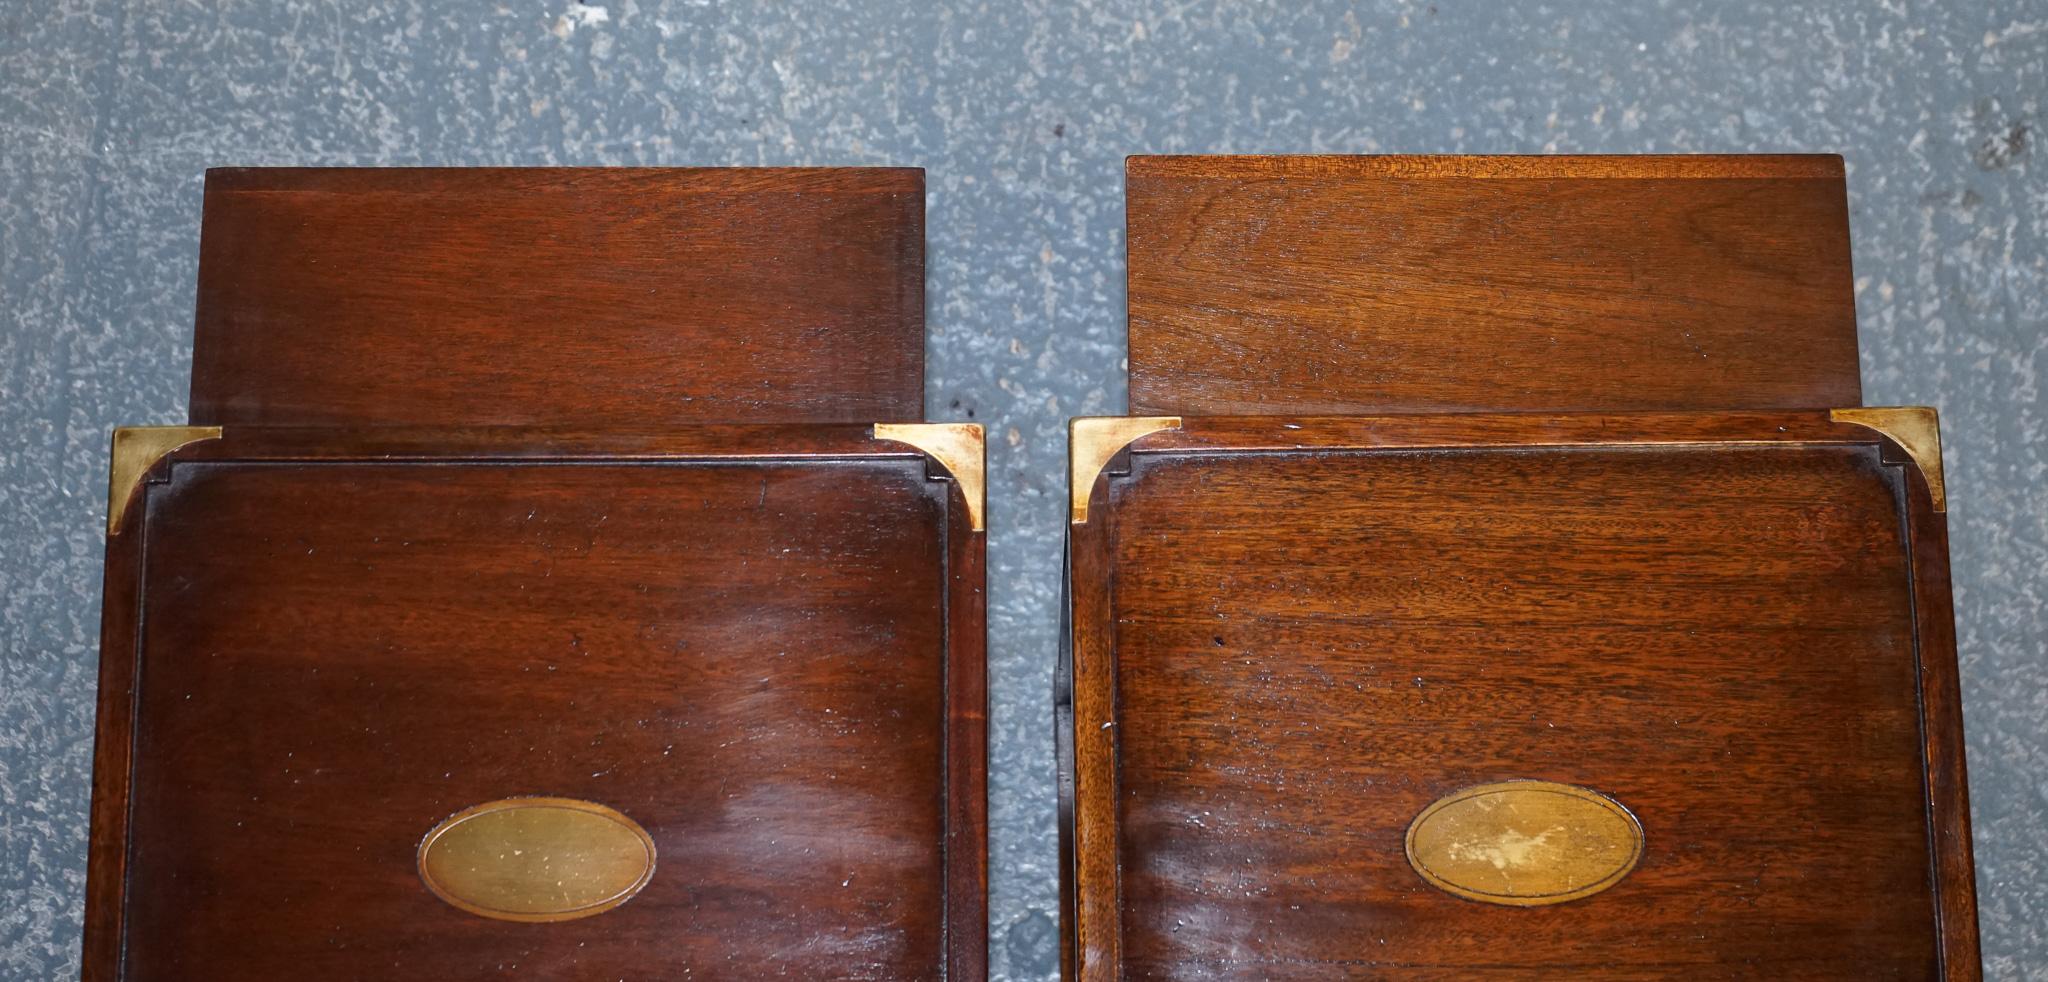 RESTORED PAiR OF HARRODS KENNEDY DOUBLE SIDED CAMPAIGN SIDE TABLES BUTLER TRAYS  4